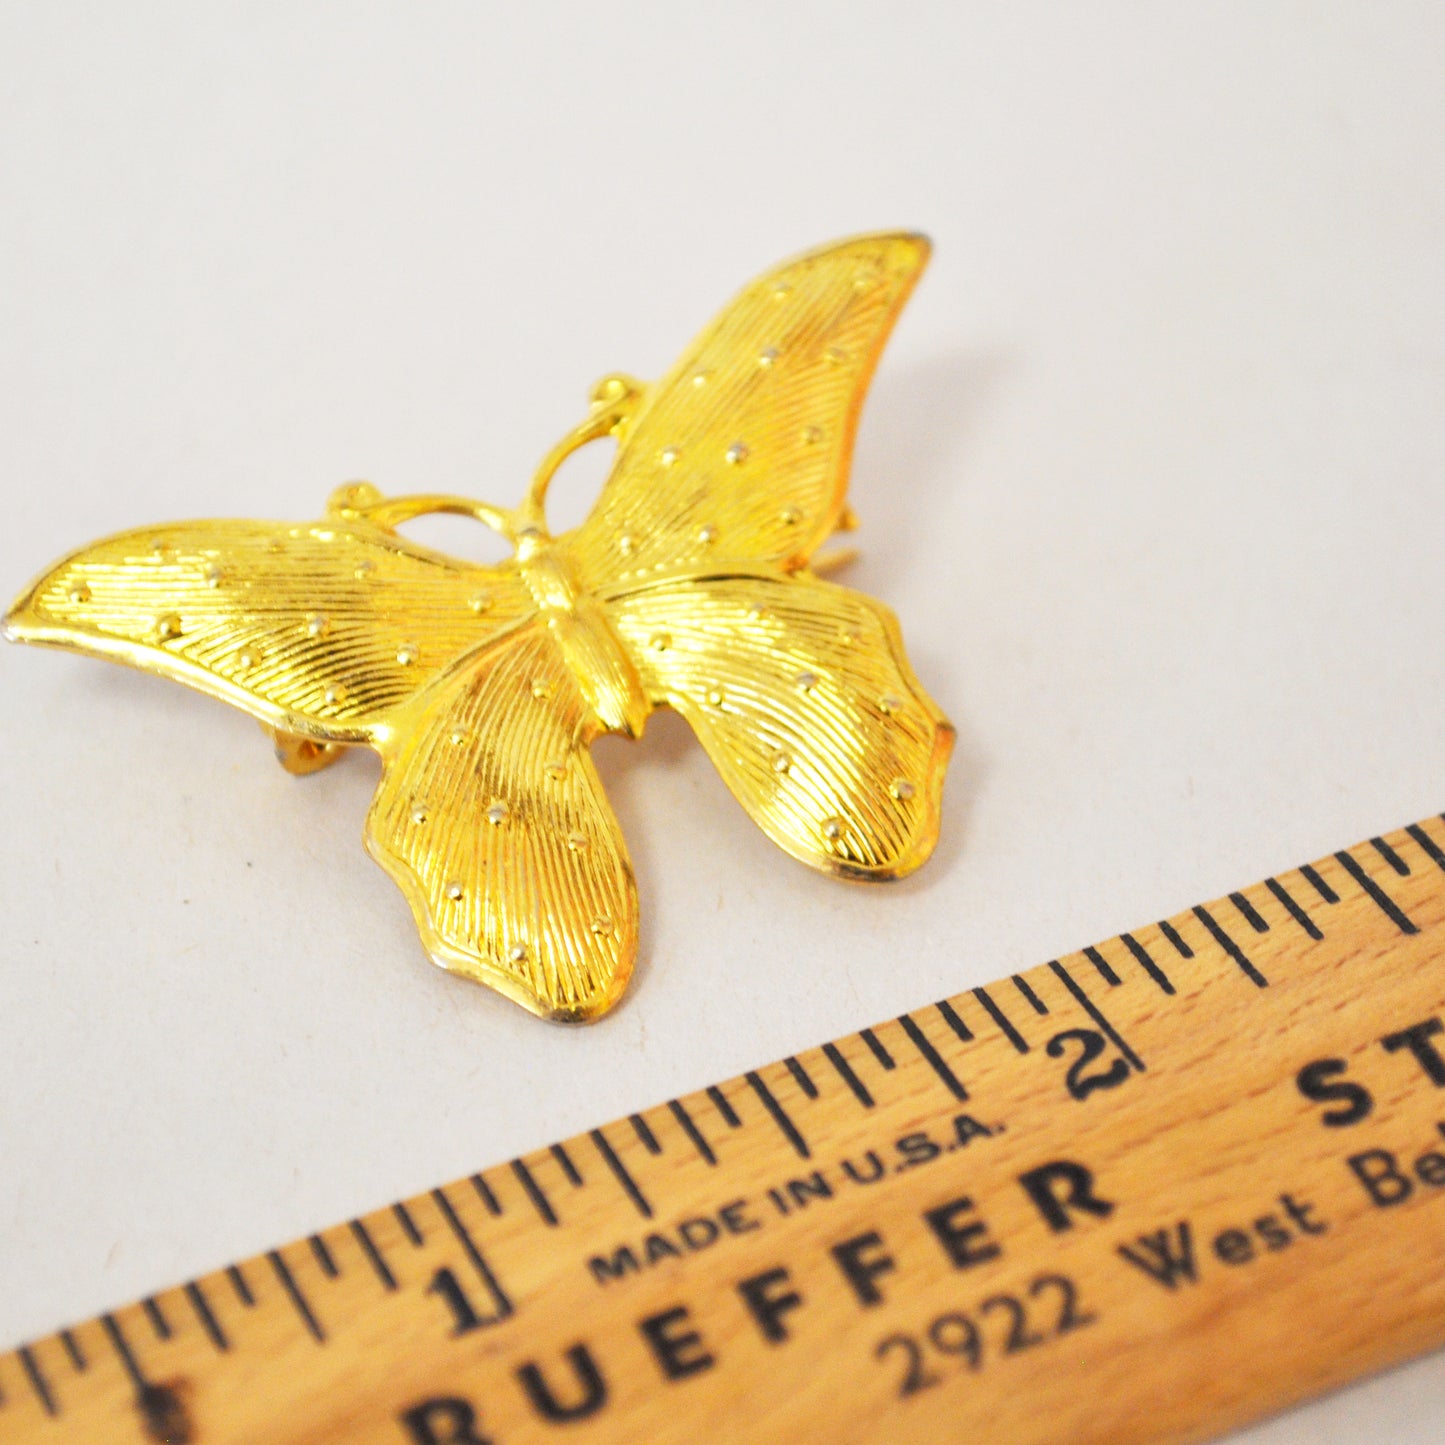 Vintage Gold Butterfly Pin